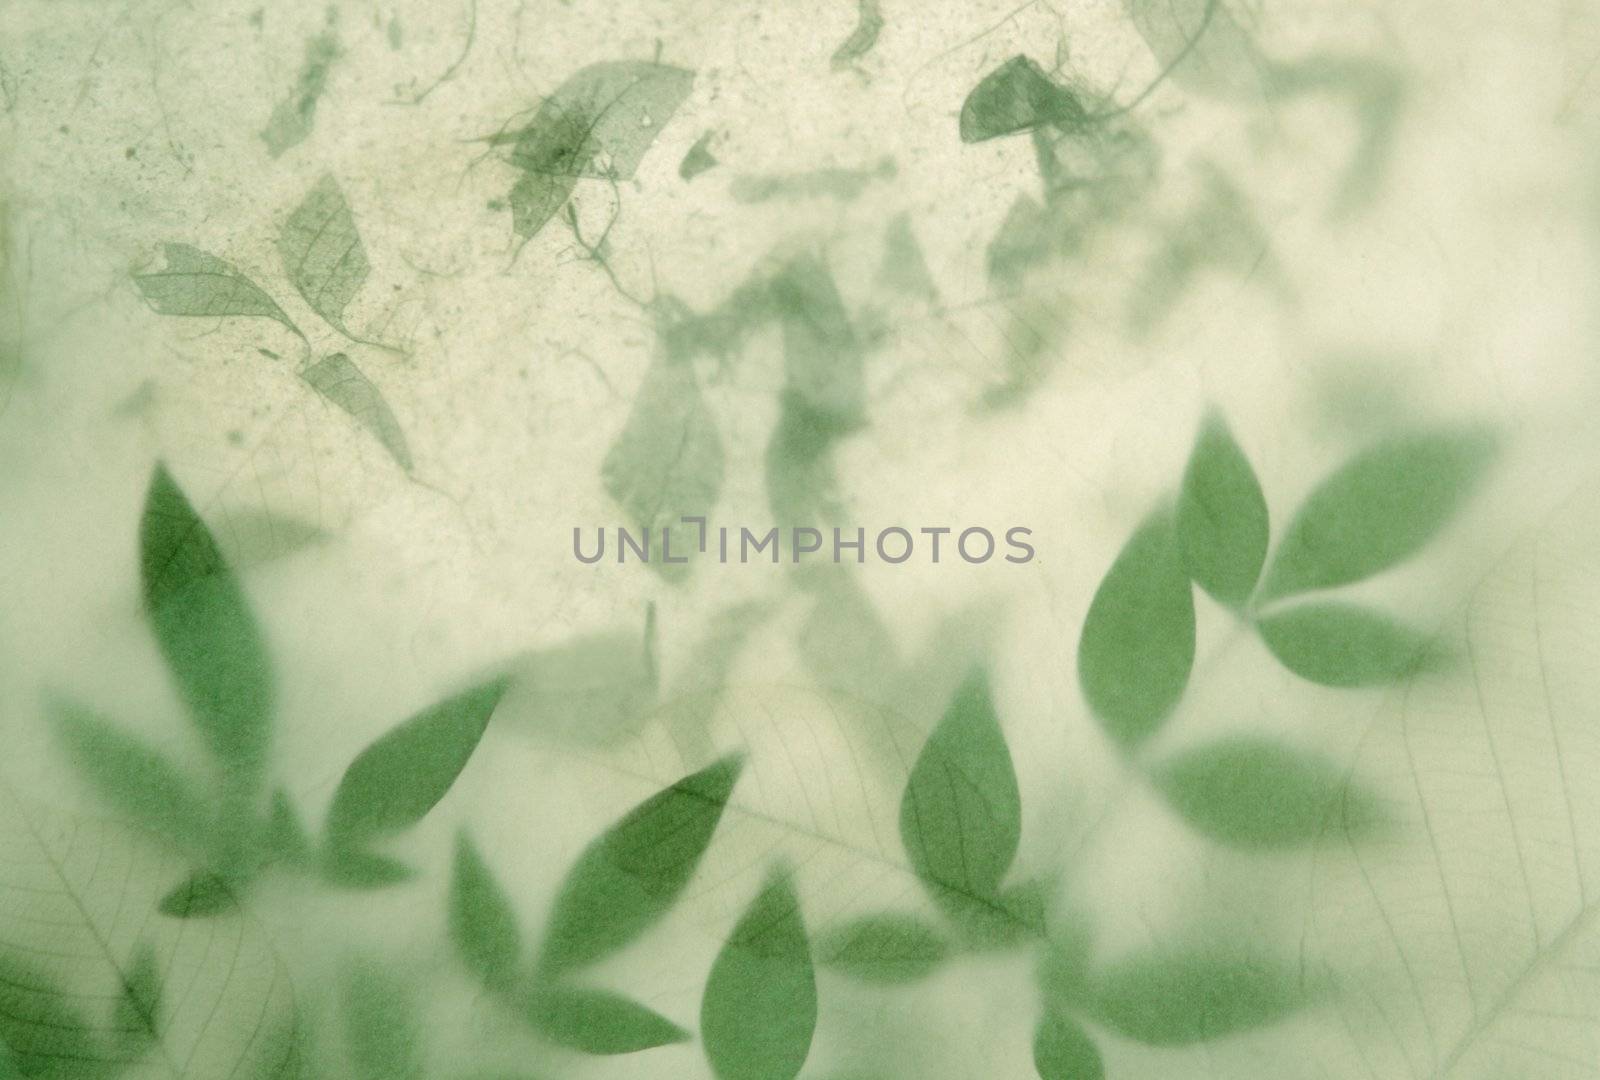 textured paper partially obscures heavenly bamboo leaves over handmade paper with torn leaves embedded